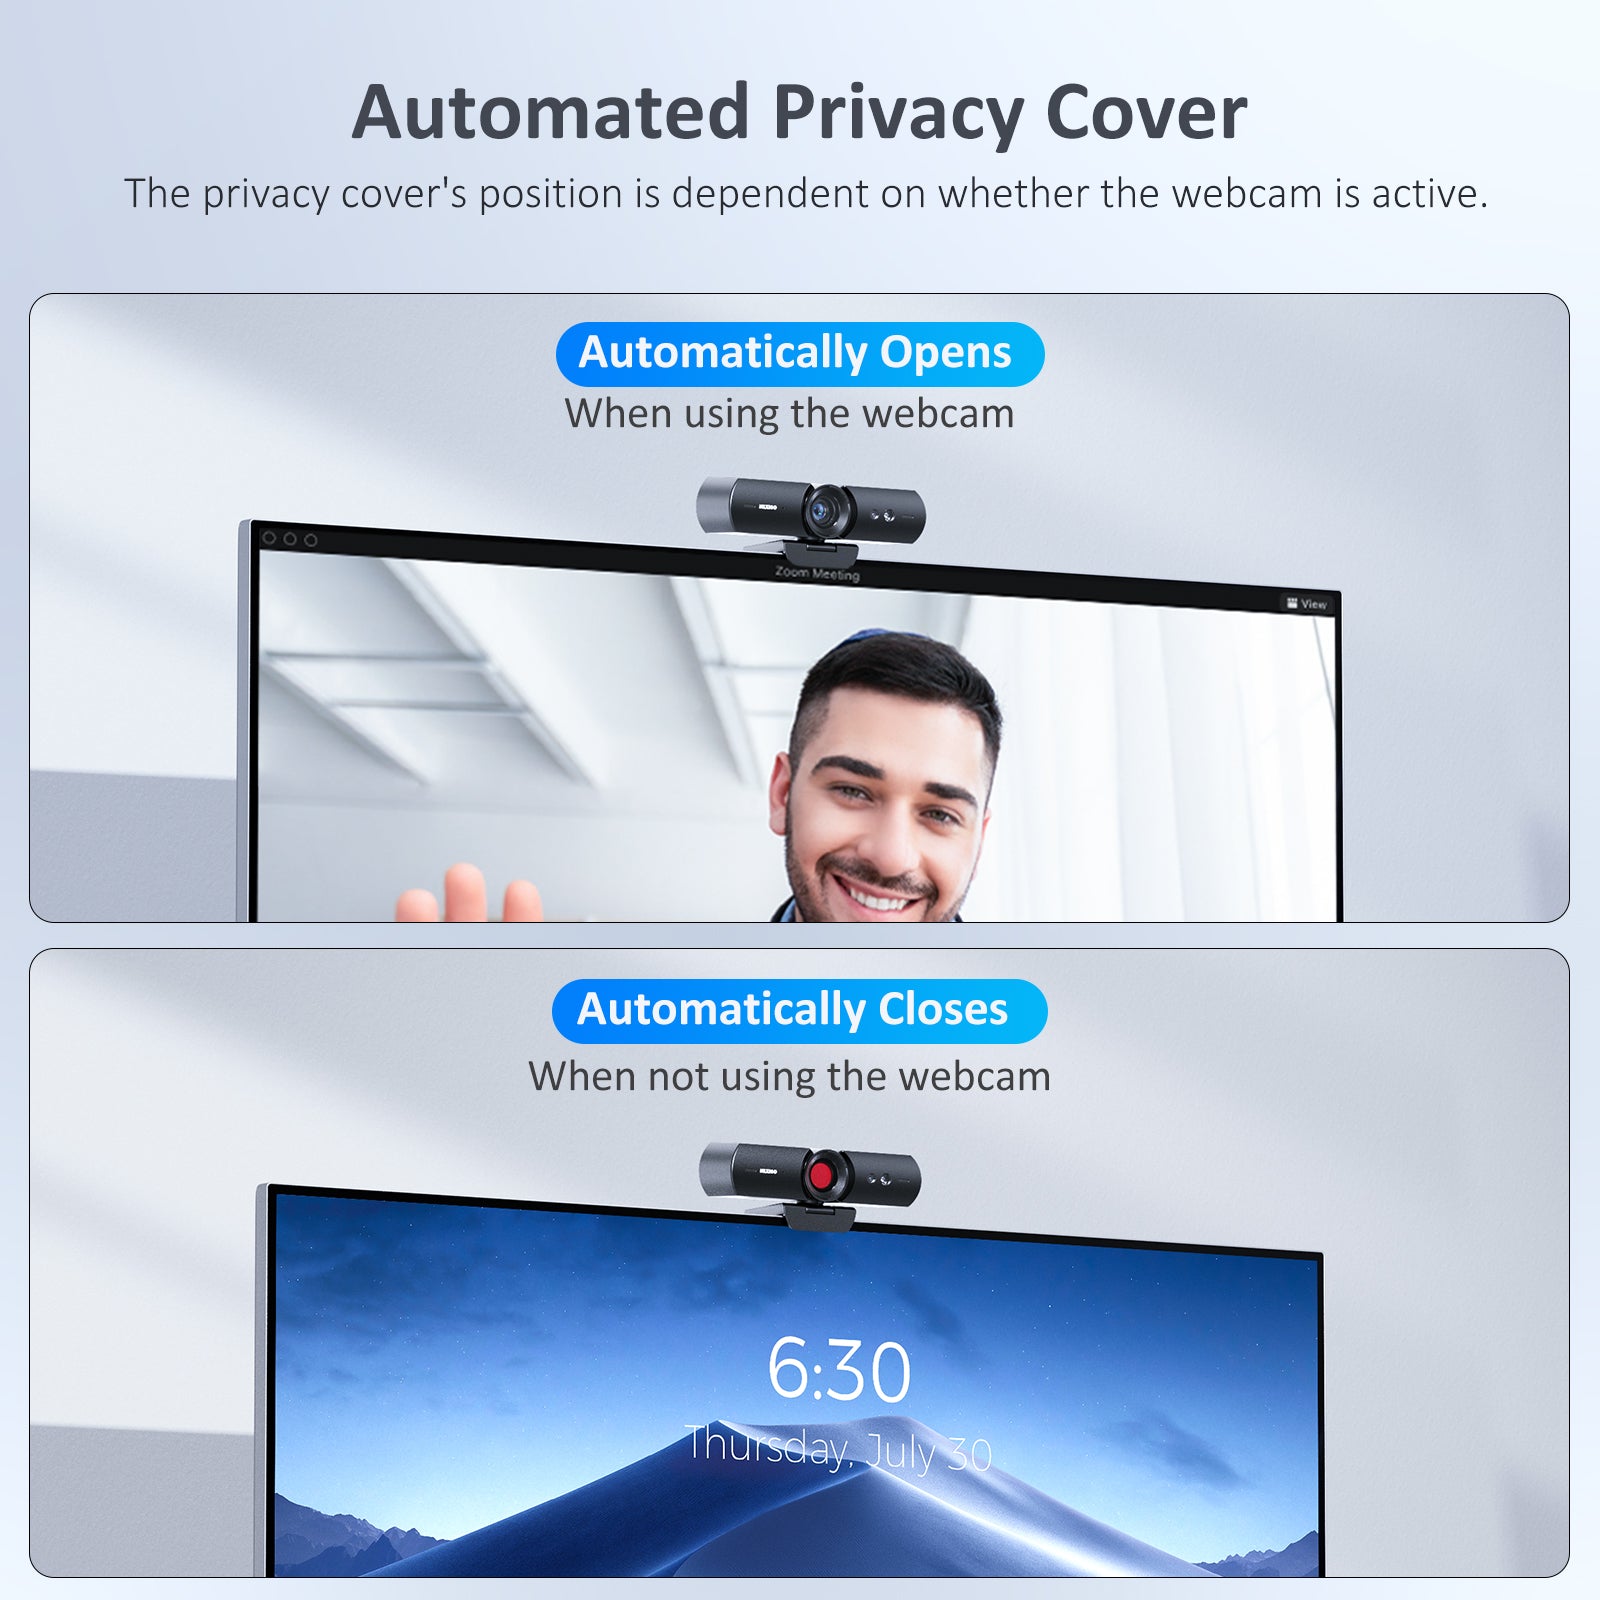 The automatic privacy cover that opens the camera during video calls and
closes it after the call.